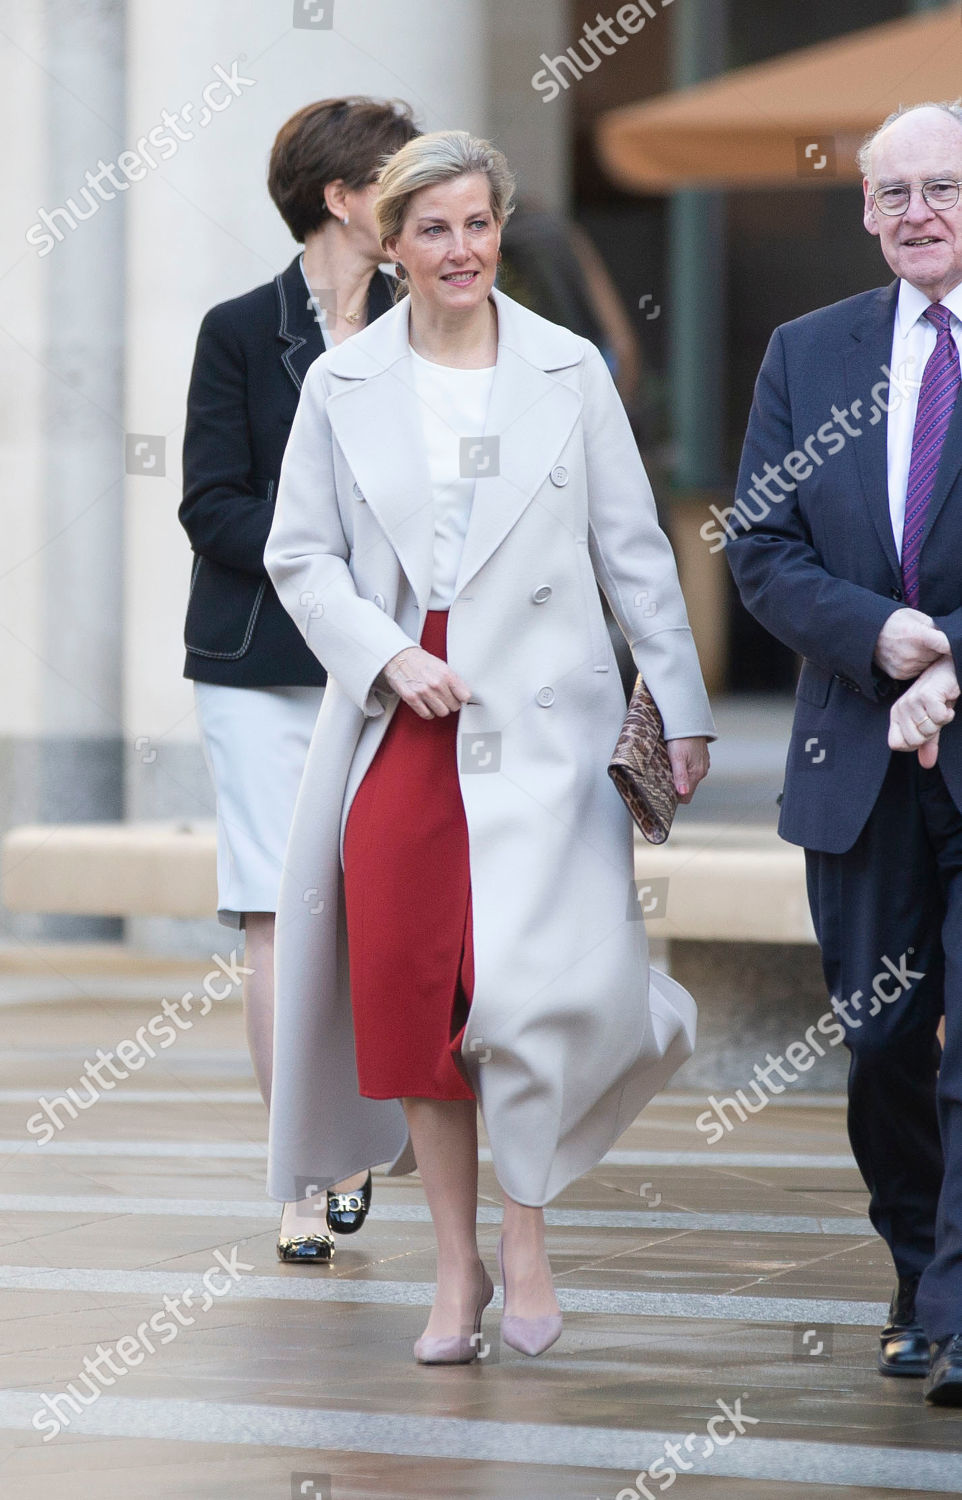 sophie-countess-of-wessex-attends-womens-network-forum-and-market-opening-ceremony-international-womens-day-london-uk-08-mar-2019-shutterstock-editorial-10147941i.jpg